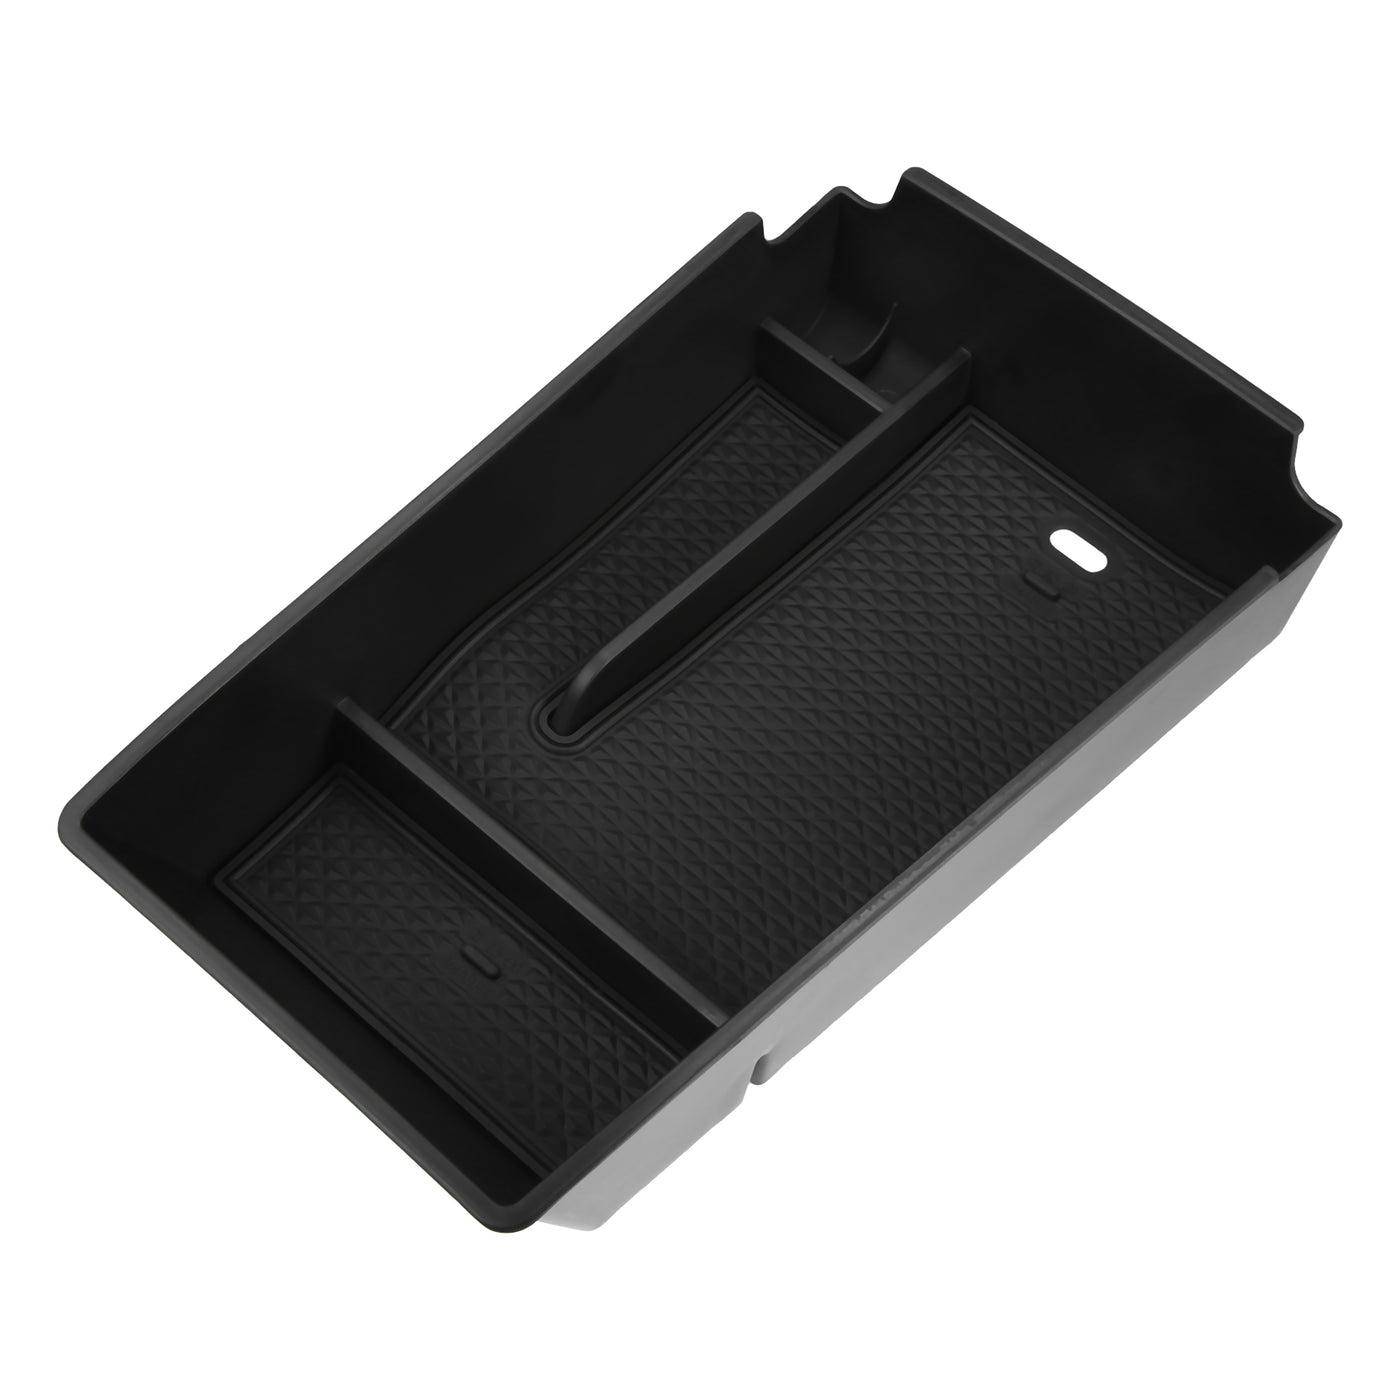 ACROPIX Front Center Console Organizer Tray Fit for Kia K5 2021-2023 - Pack of 1 Black